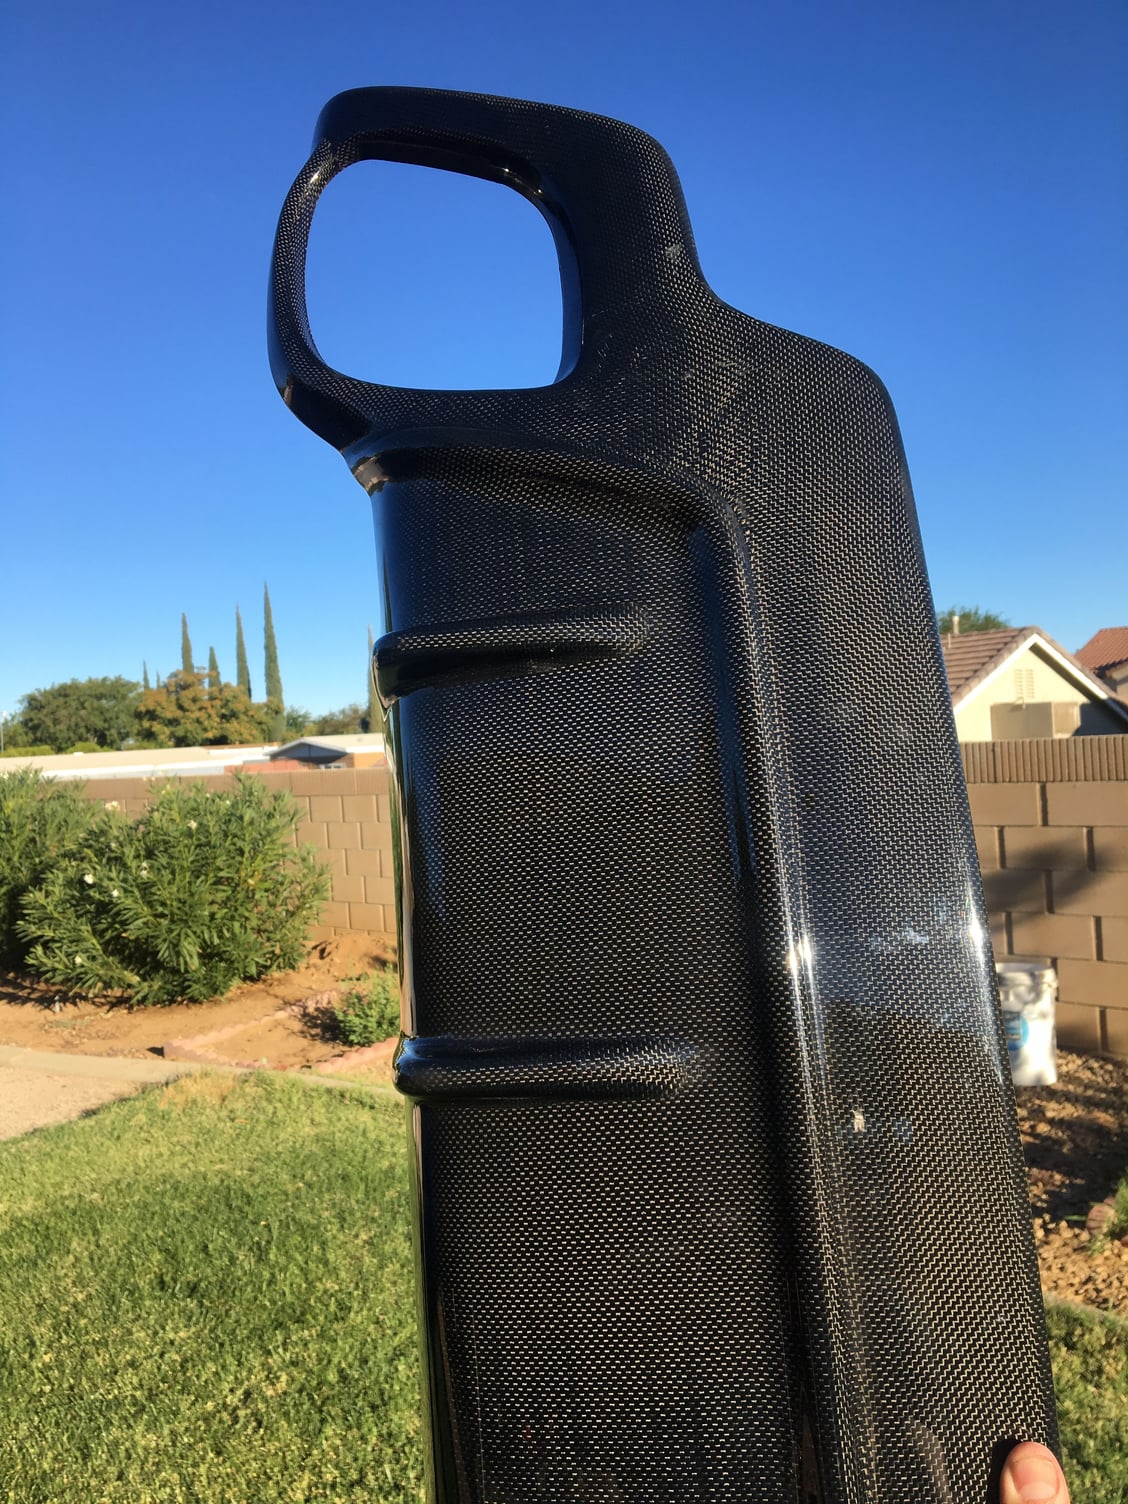 Exterior Body Parts - Tom's carbon rep. ISF diffuser - Used - 2008 to 2012 Lexus IS F - Palmdale, CA 93551, United States